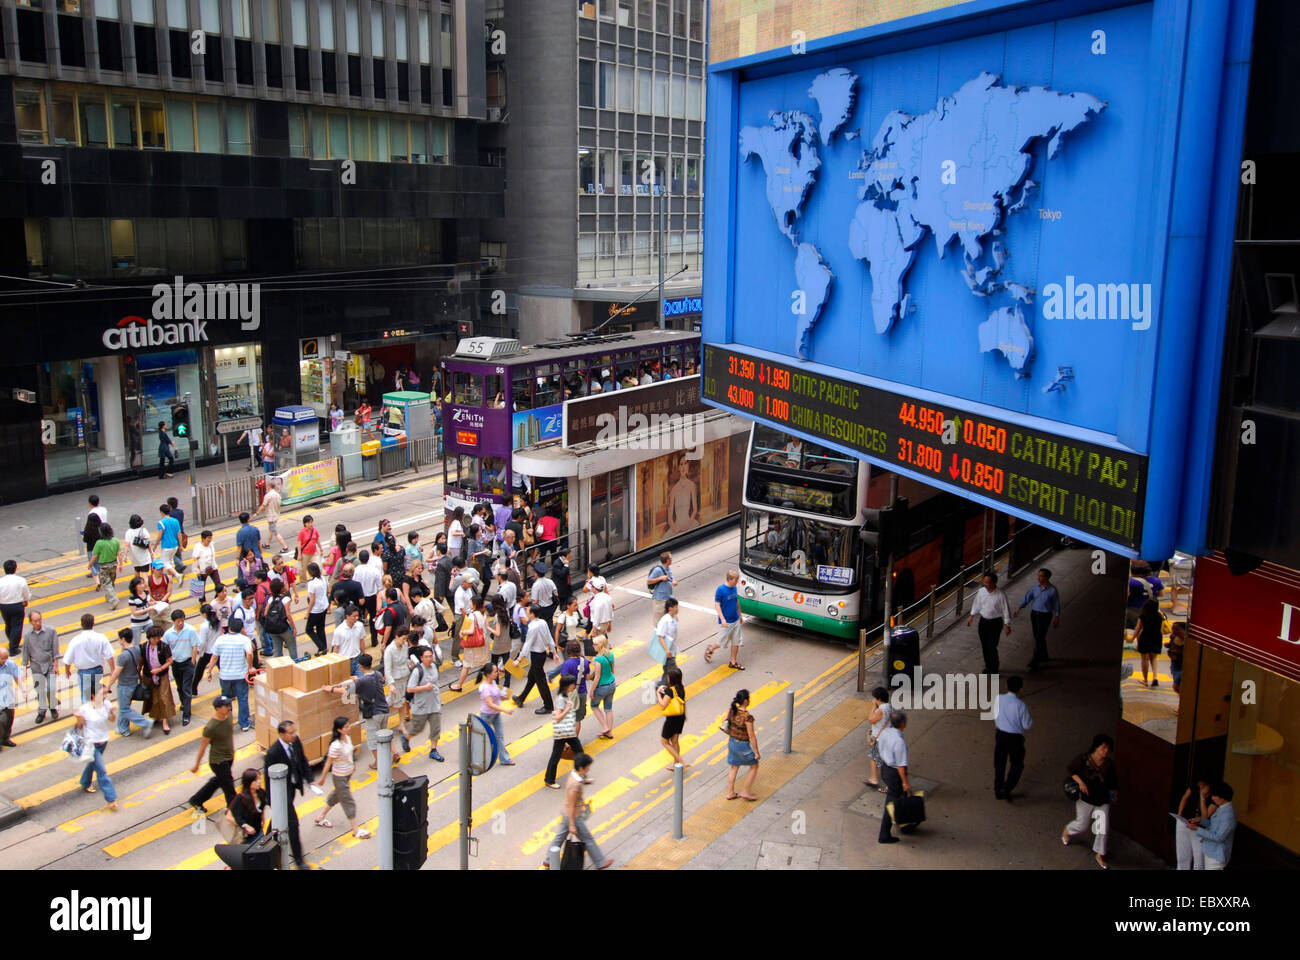 people in downtown, display panel with world map and stock list, China, Hong Kong Stock Photo